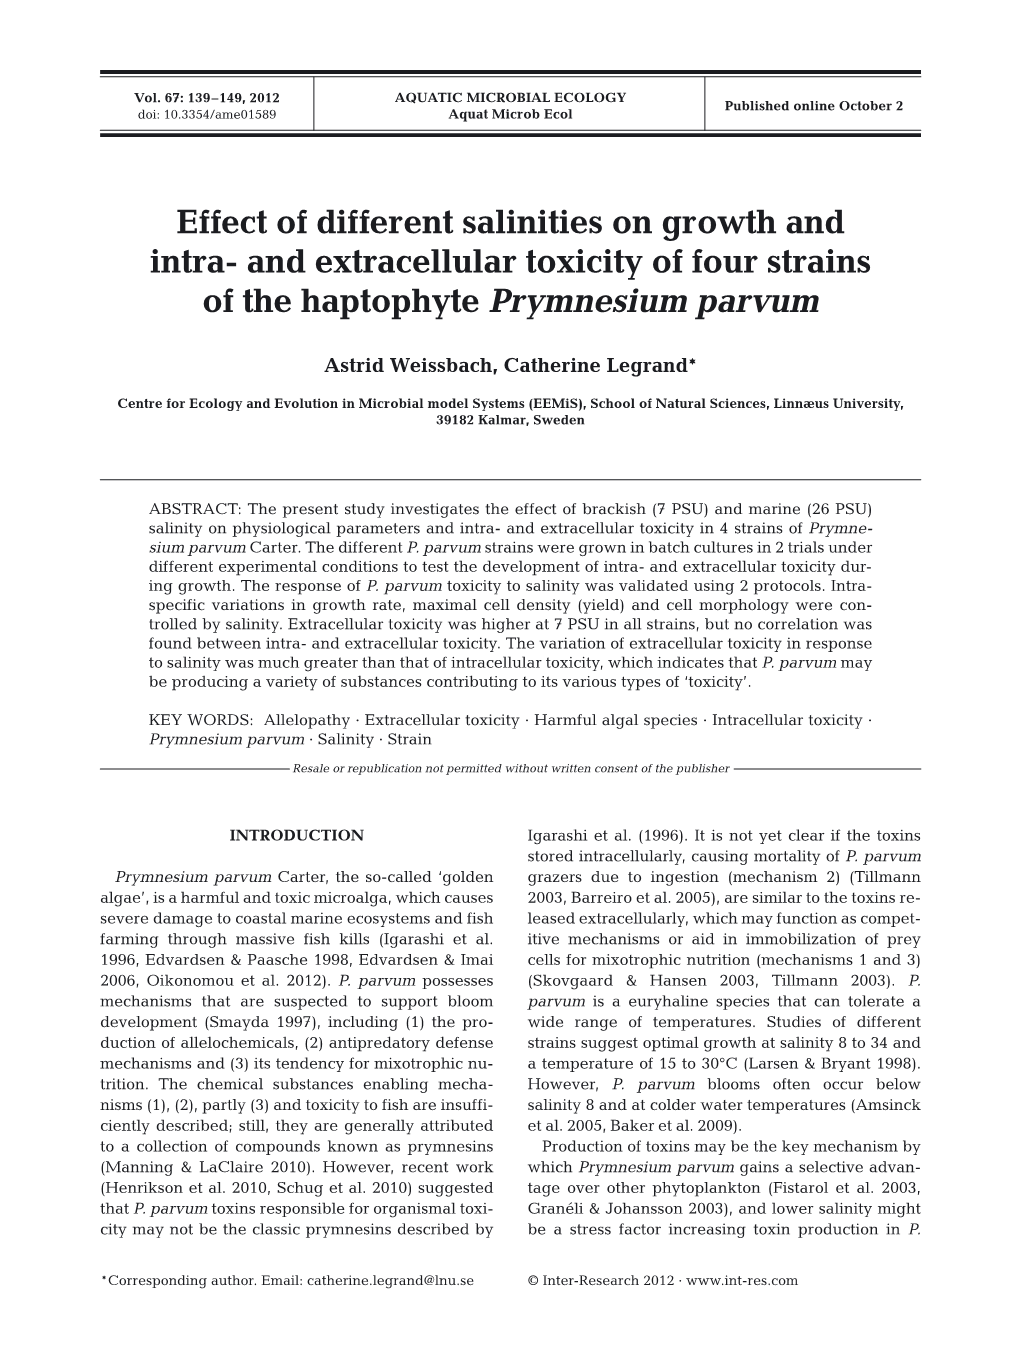 Effect of Different Salinities on Growth and Intra-And Extracellular Toxicity